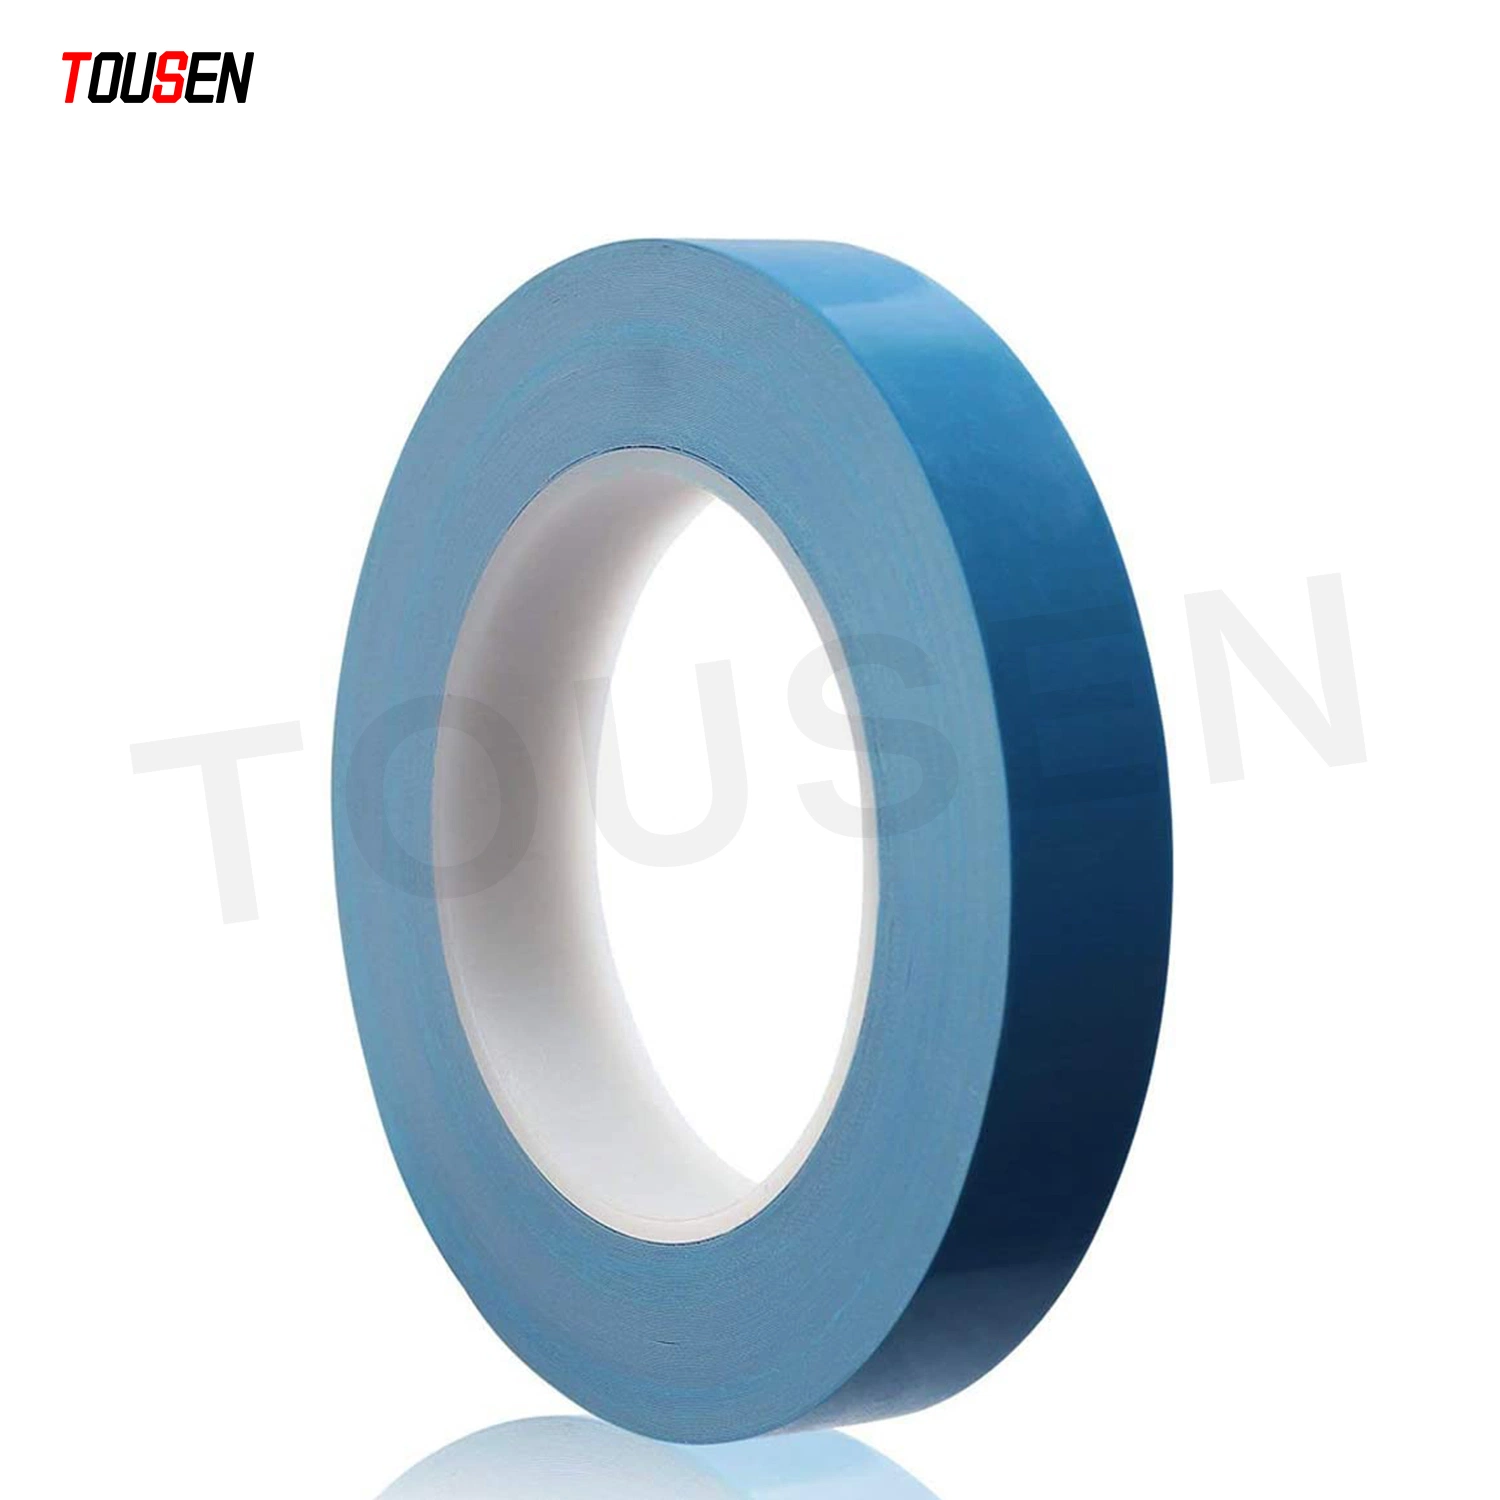 Tousen Conductive Tape Thermal Conductive Double Sided Tape Adhesive Transfer Tape Thermal Management Custom Die Cut High Performance Computer/LED/PCB